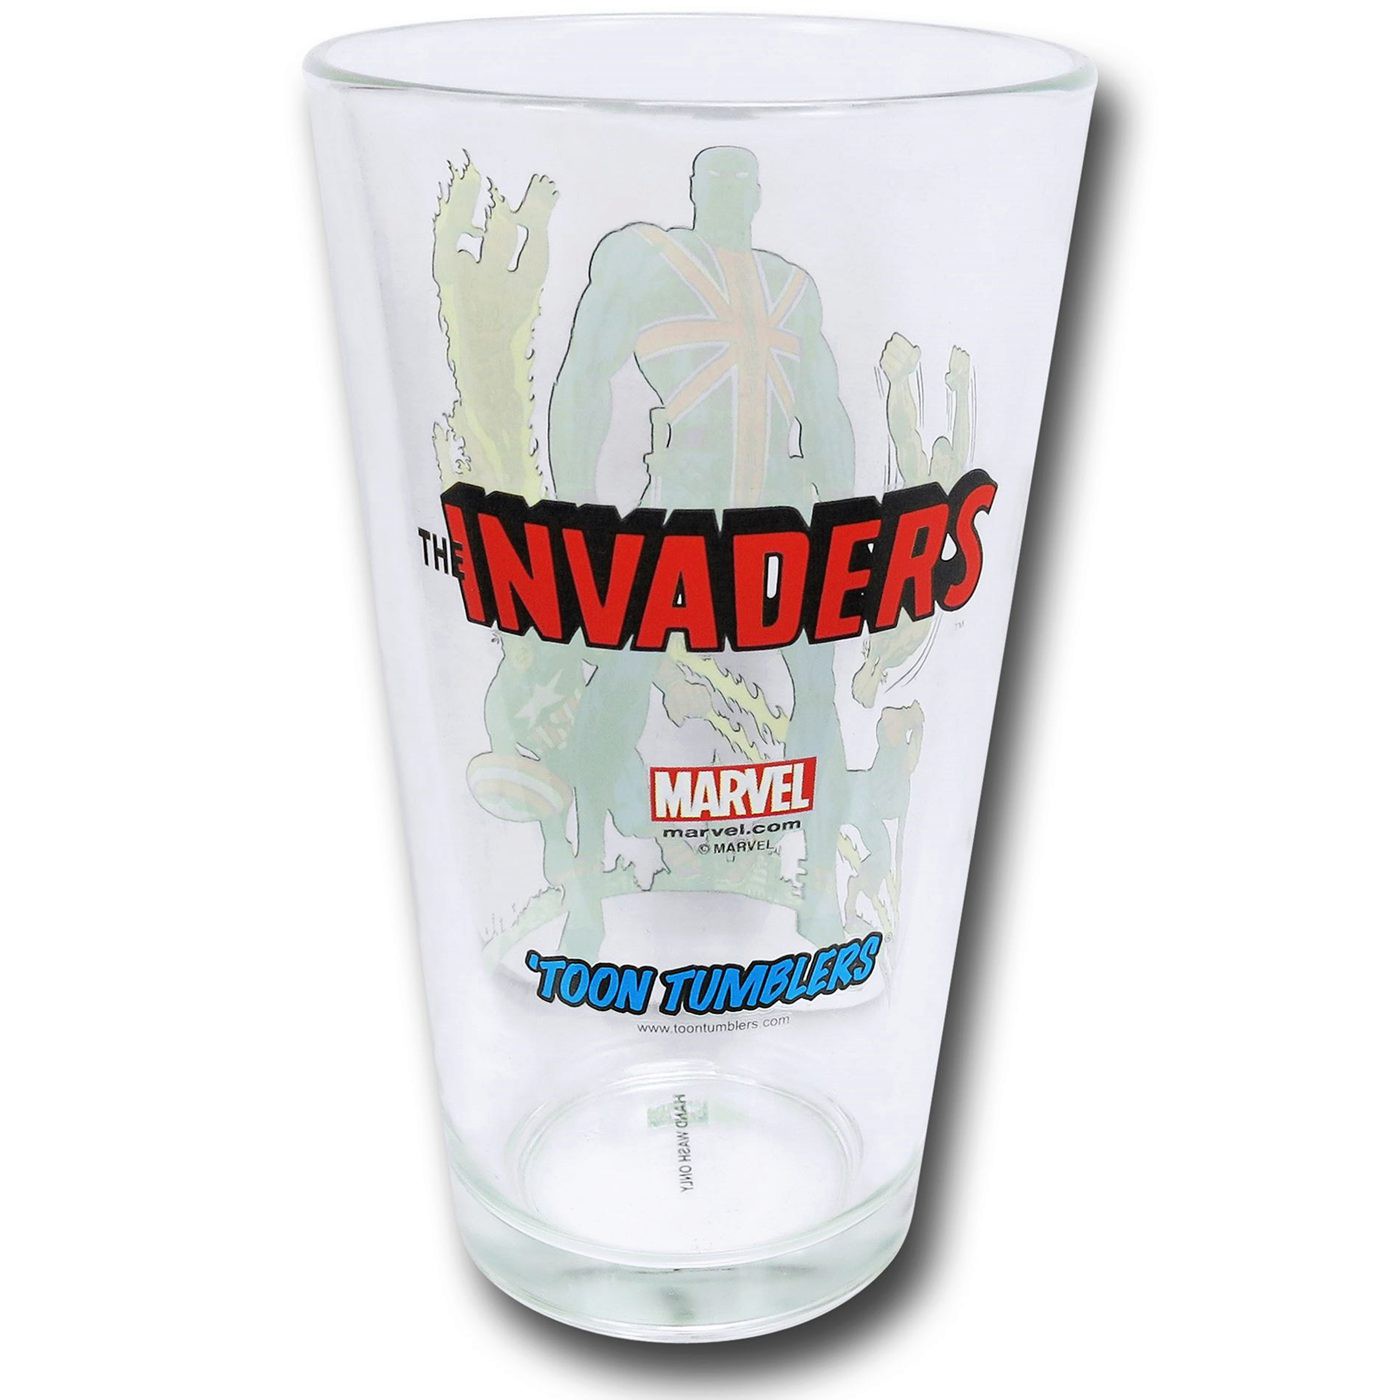 The Invaders Pint Glass